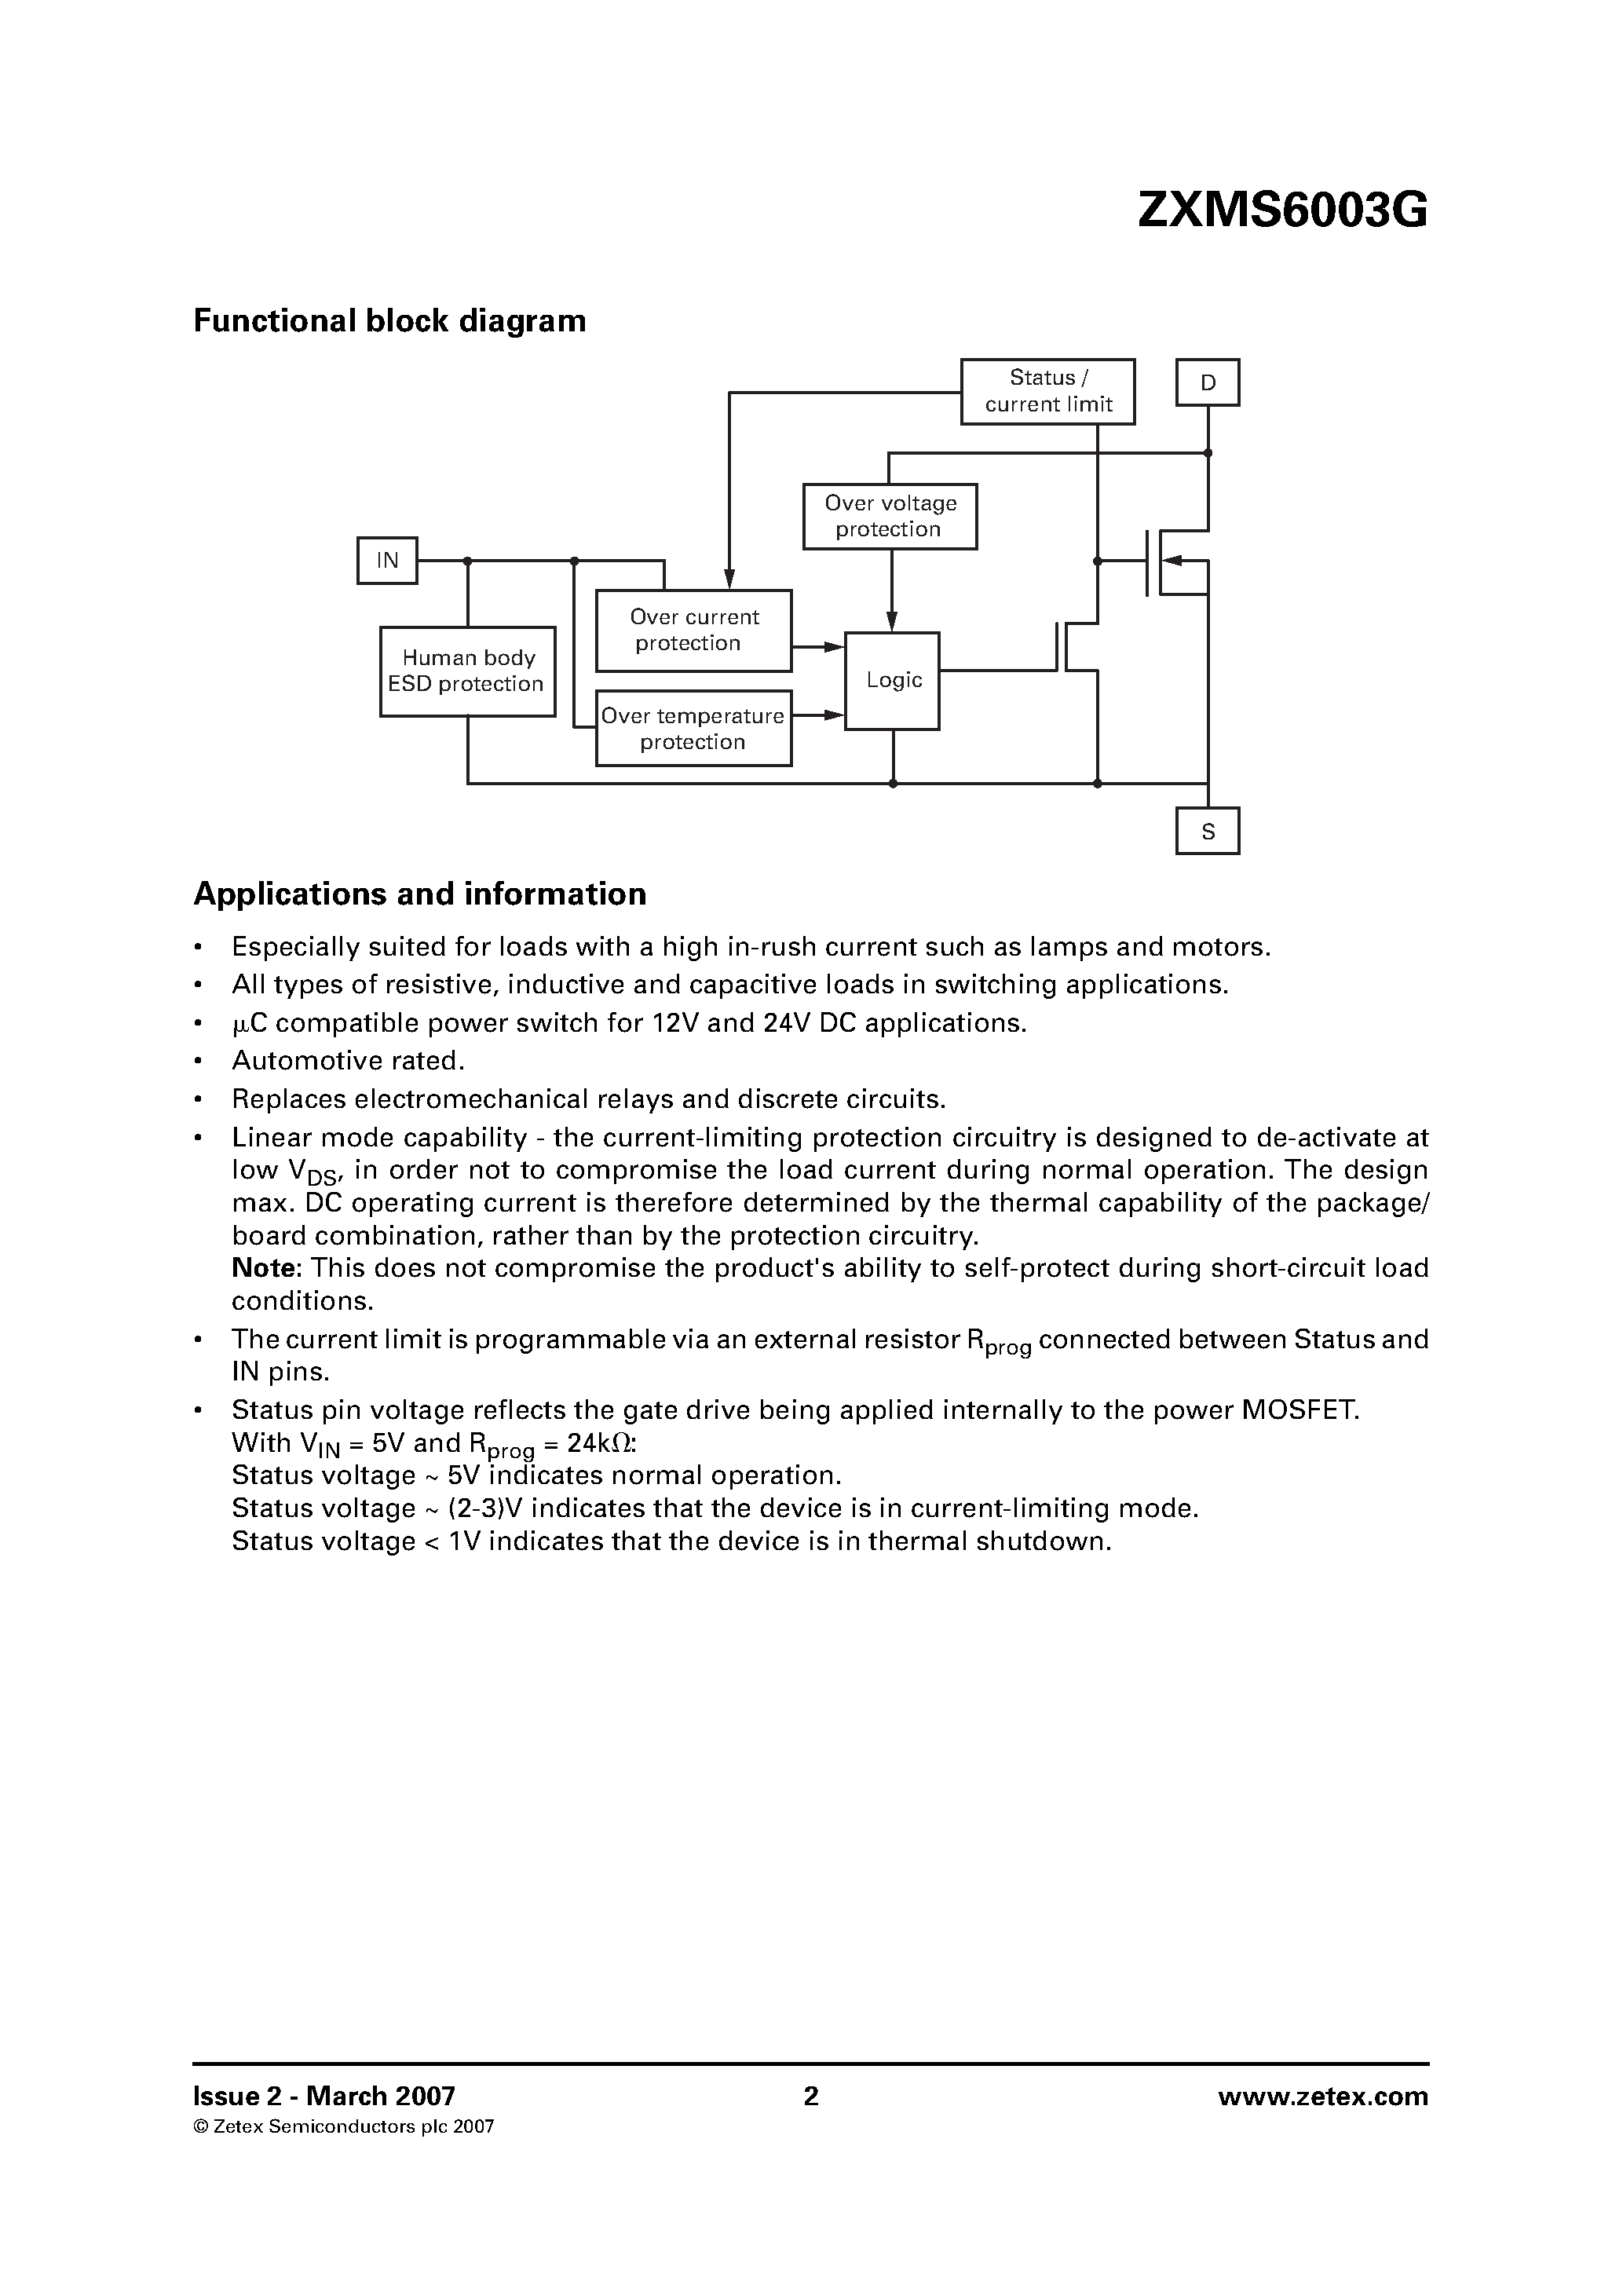 Datasheet ZXMS6003G - N-channel self protected enhancement mode IntelliFET MOSFET page 2